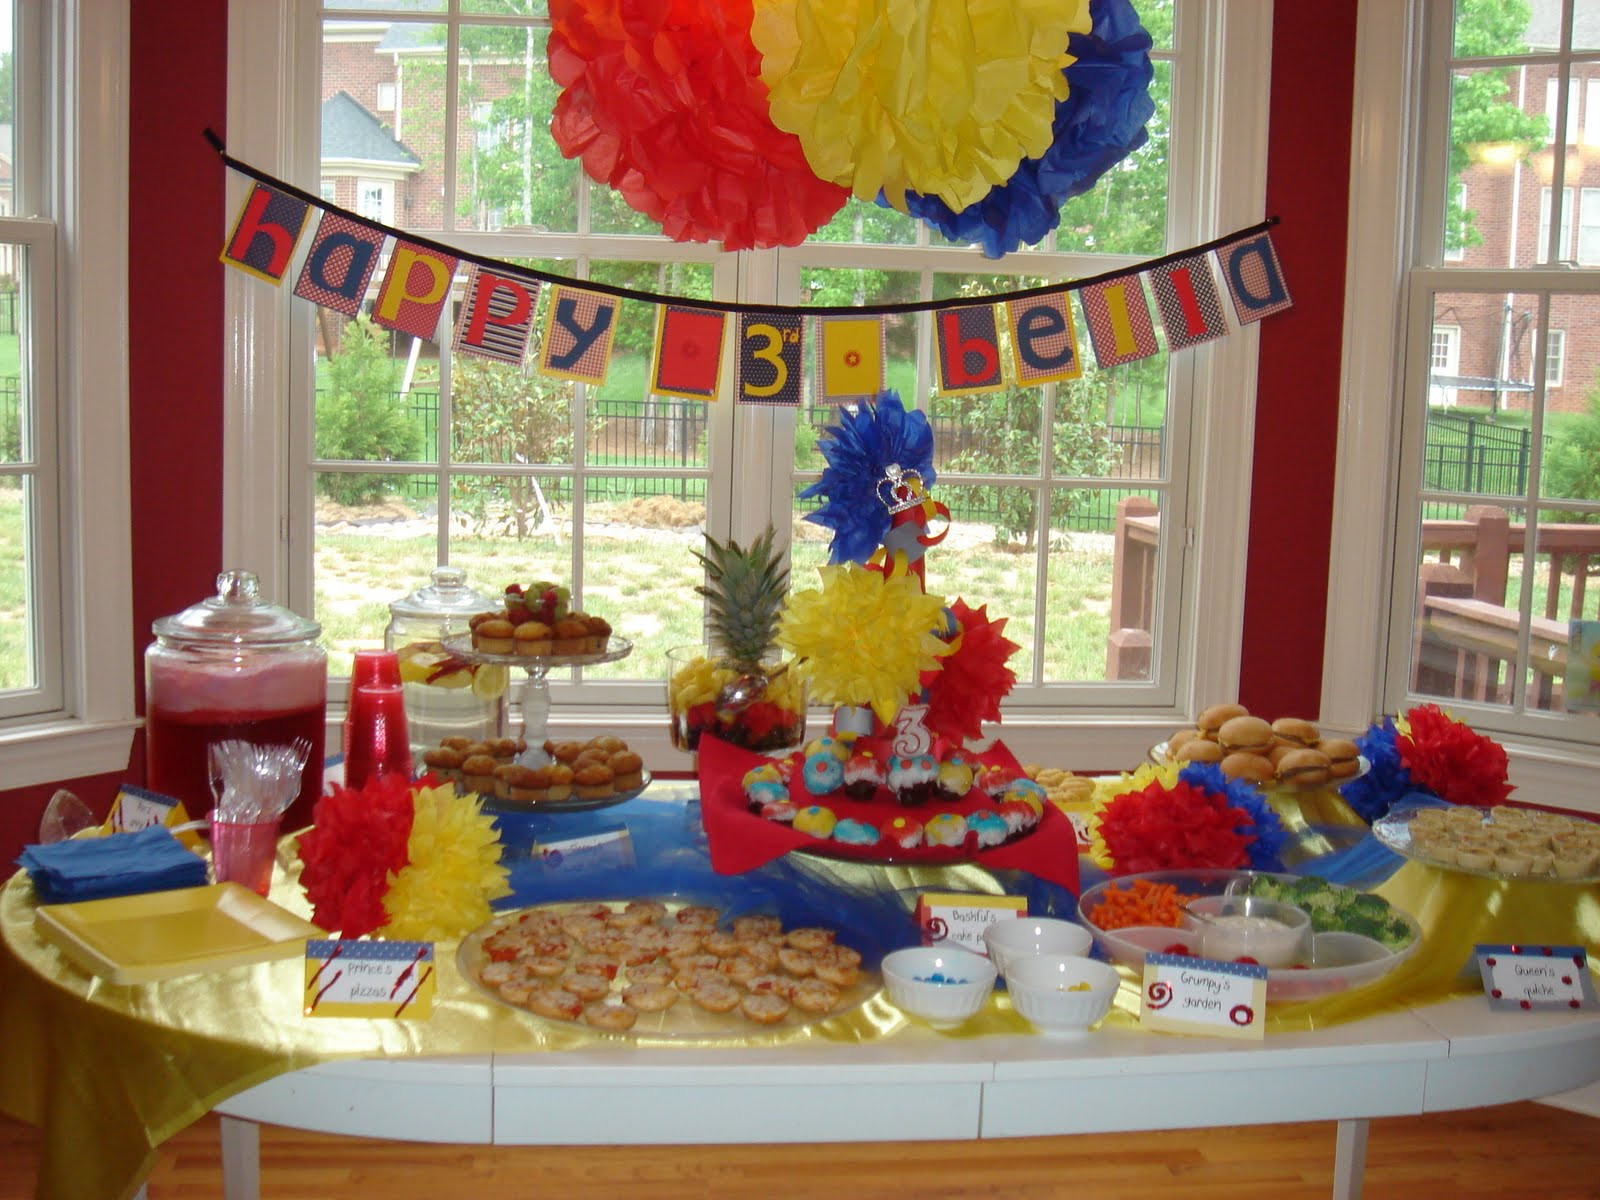 Snow White Birthday Decorations
 Everyday is a "Hollyday" Snow White Party